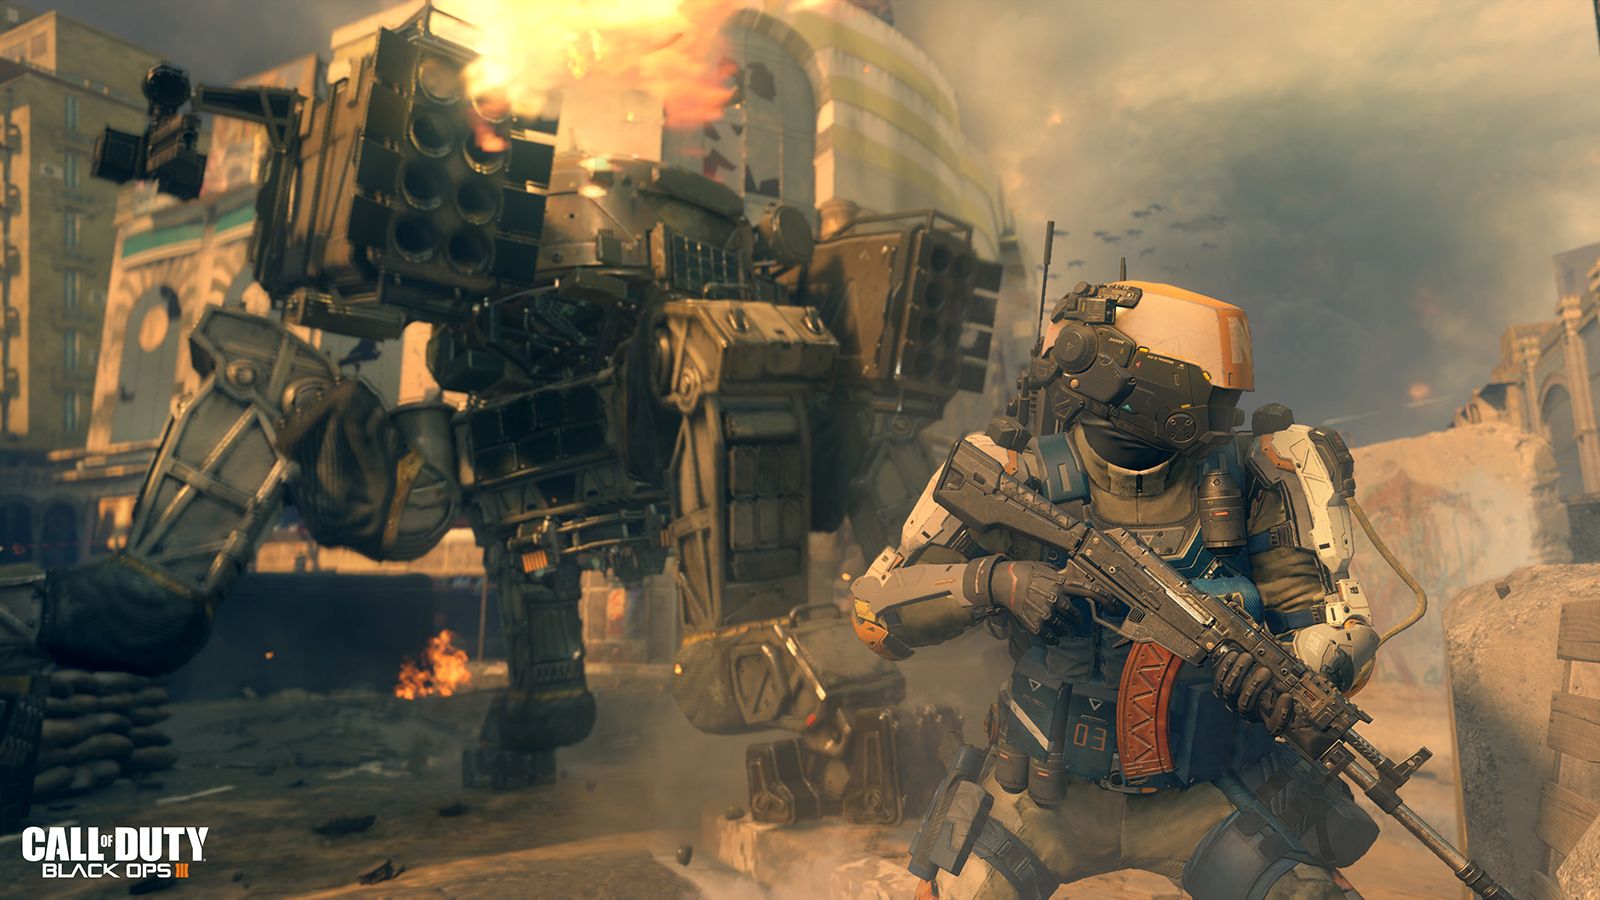 amazing call of duty black ops 3 trailer shows the series continuing down the future soldier path image 1